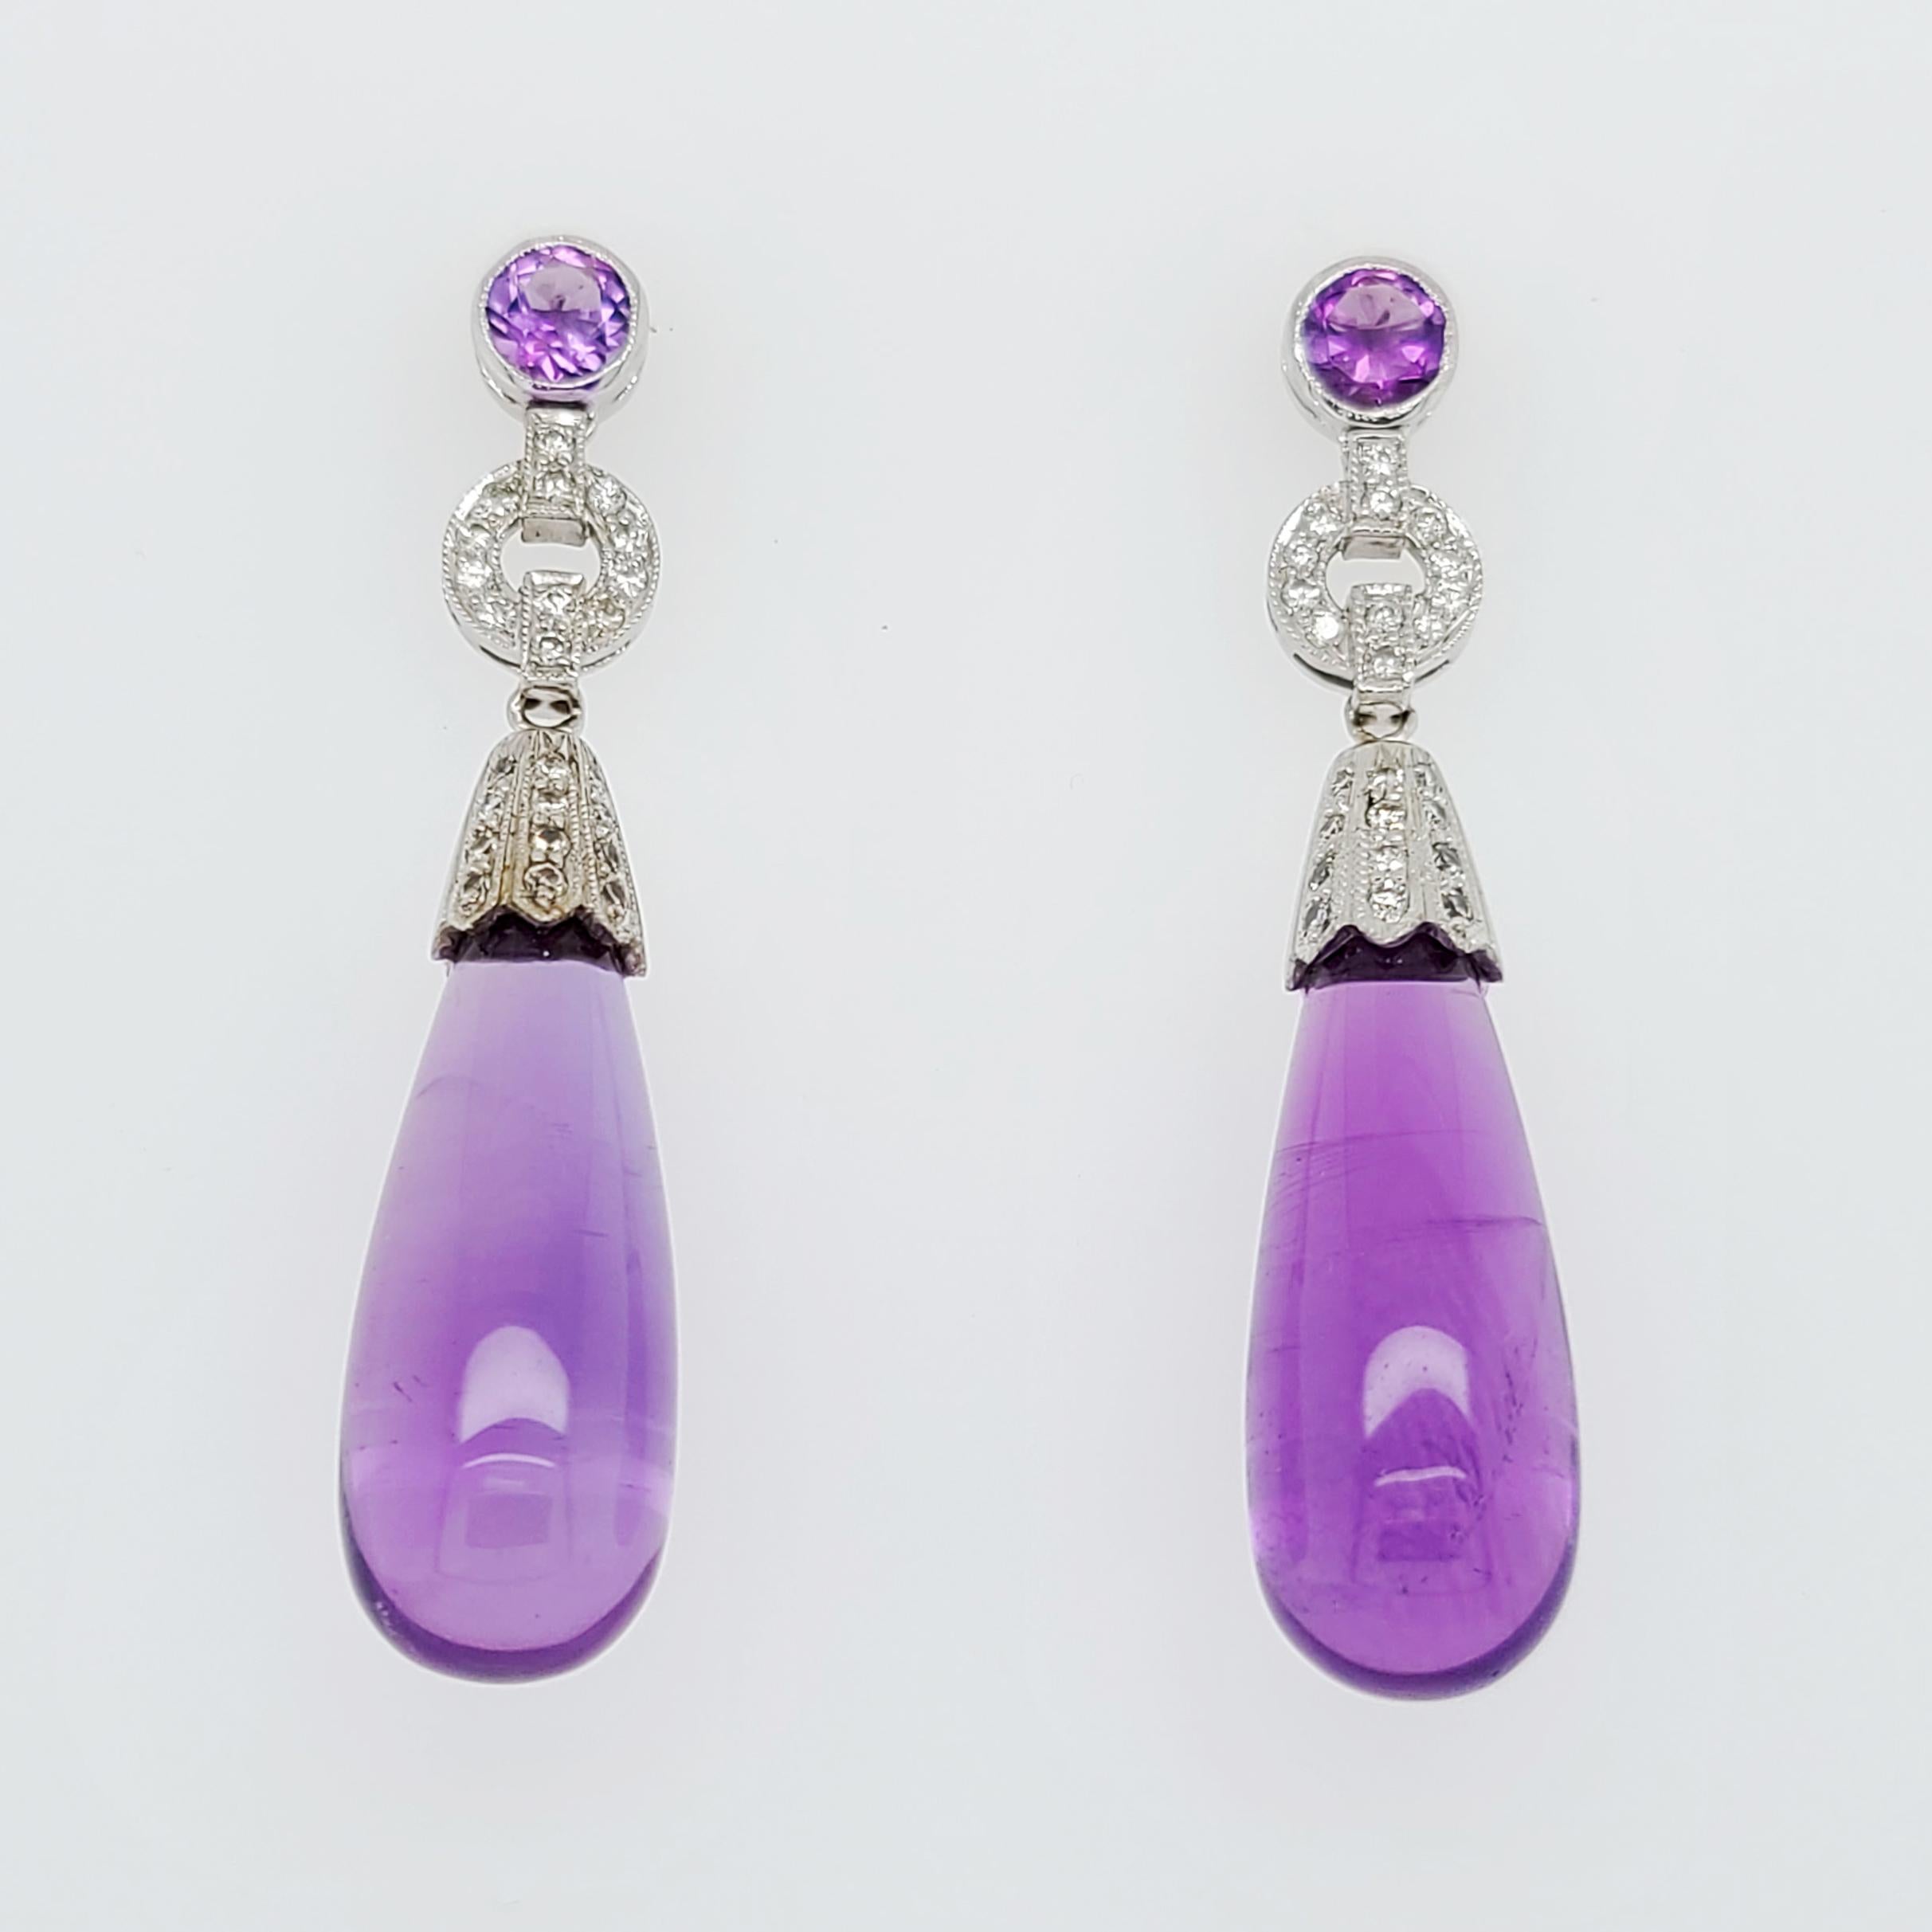 18 Karat White Gold Amethyst Drop Earrings Featuring 48 Round Brilliant Cut Diamonds Of VS Clarity and G/H Color Totaling 0.48 Carats. Pierced Post With Supportive Large Friction Backs. 1.75 Inches Long.